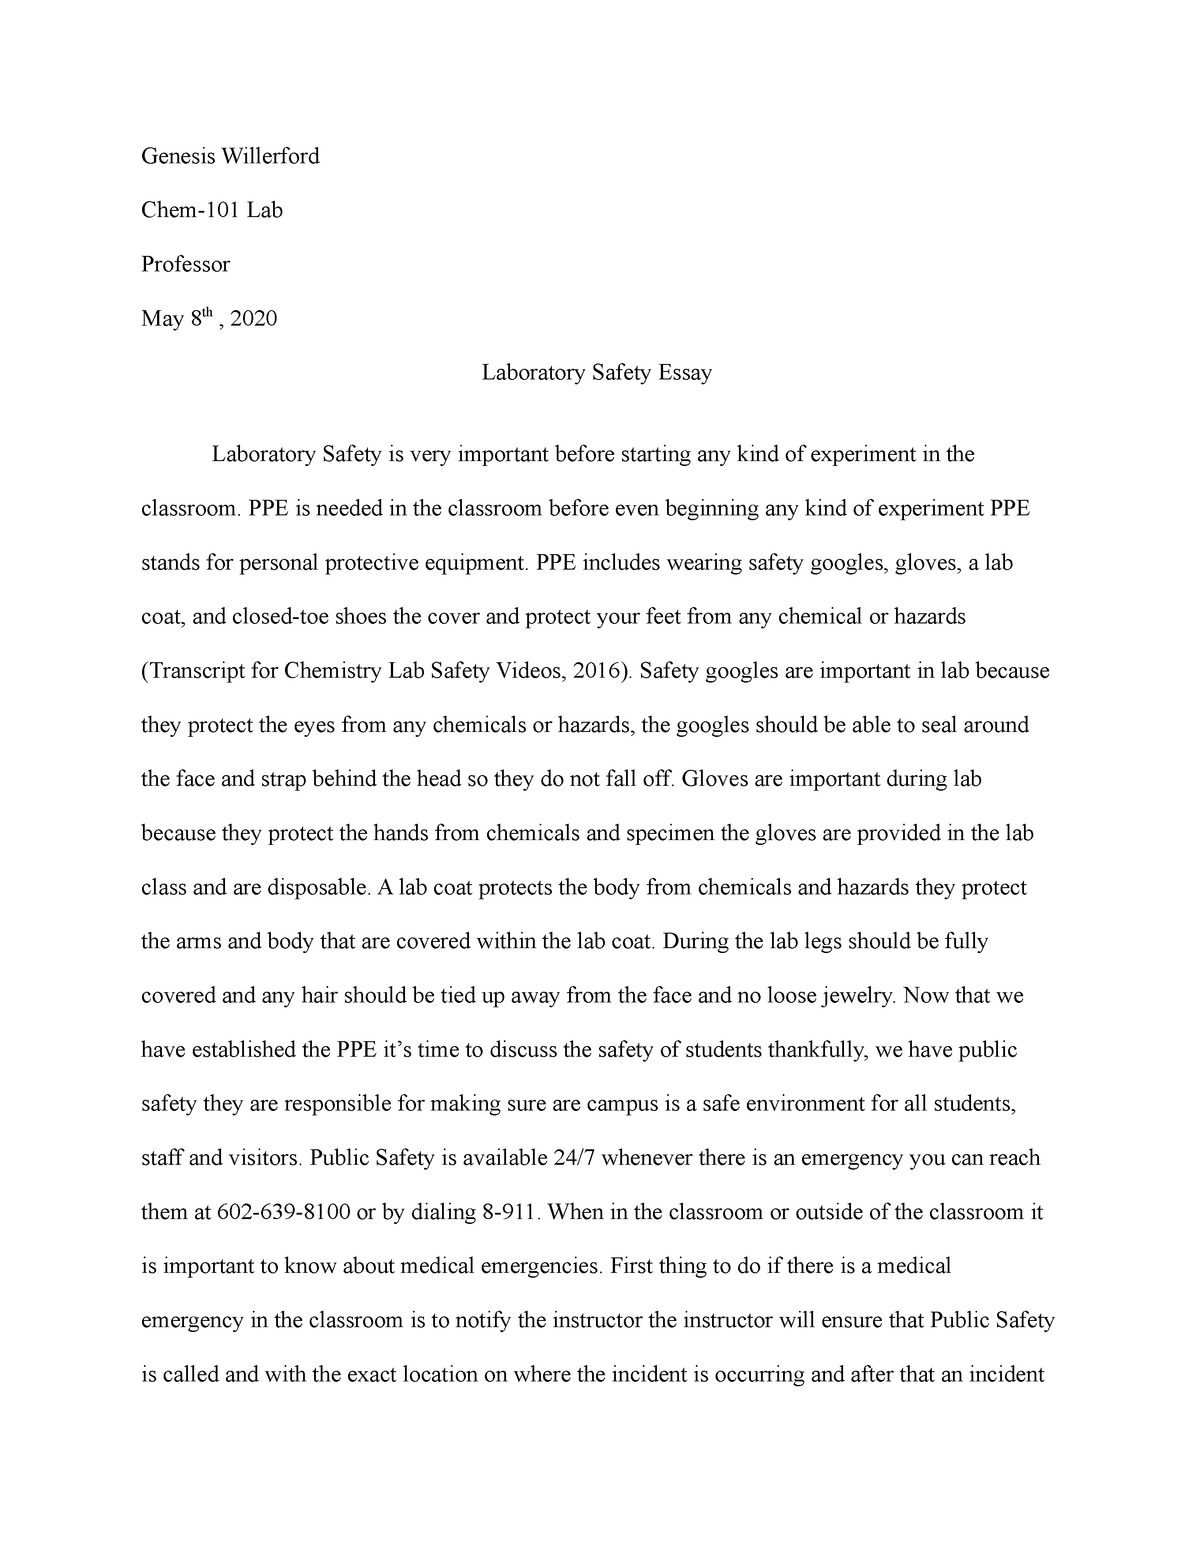 safety essay writing in english